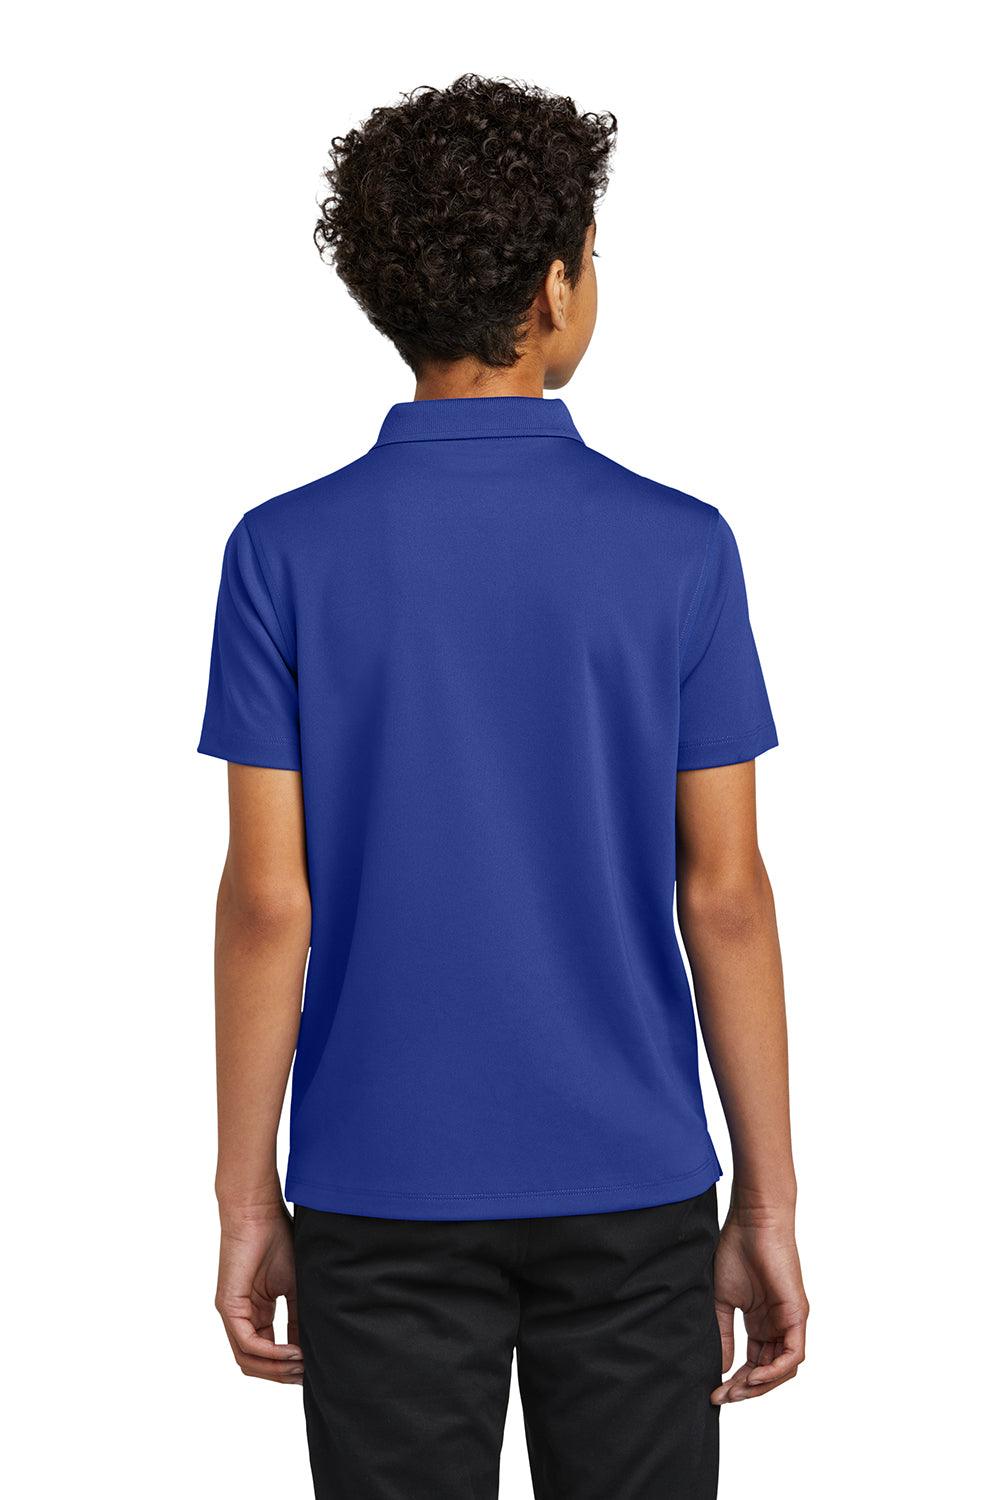 Port Authority Y110 Youth Dry Zone Moisture Wicking Short Sleeve Polo Shirt True Royal Blue Back